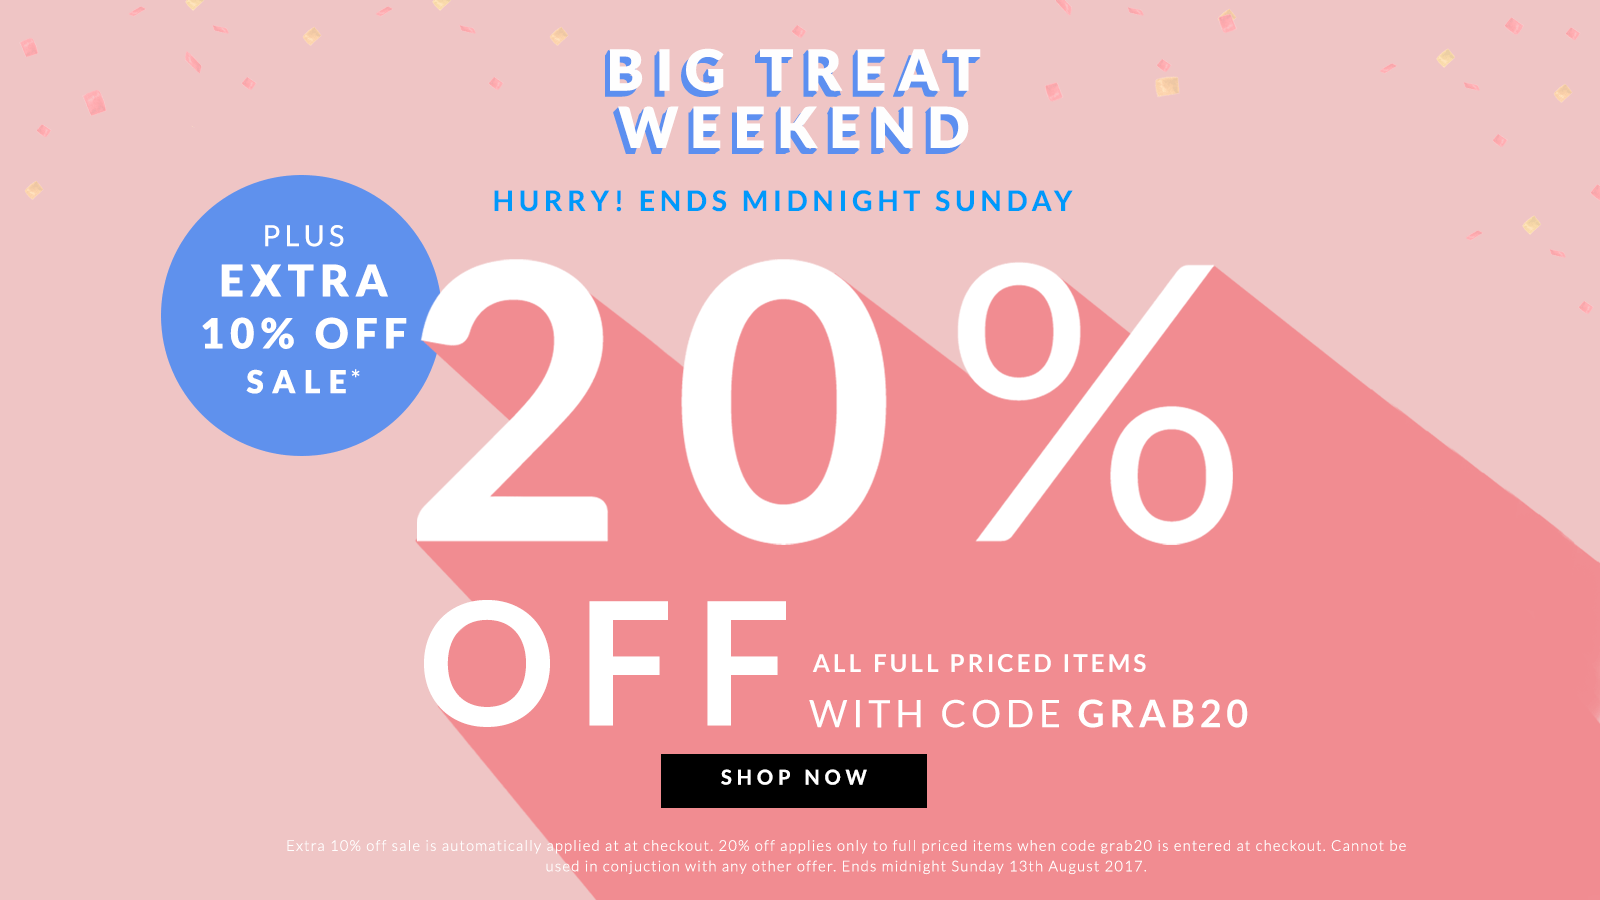 Chi Chi Chi Chi: 20% off all ful priced items plus extra 10% off sale